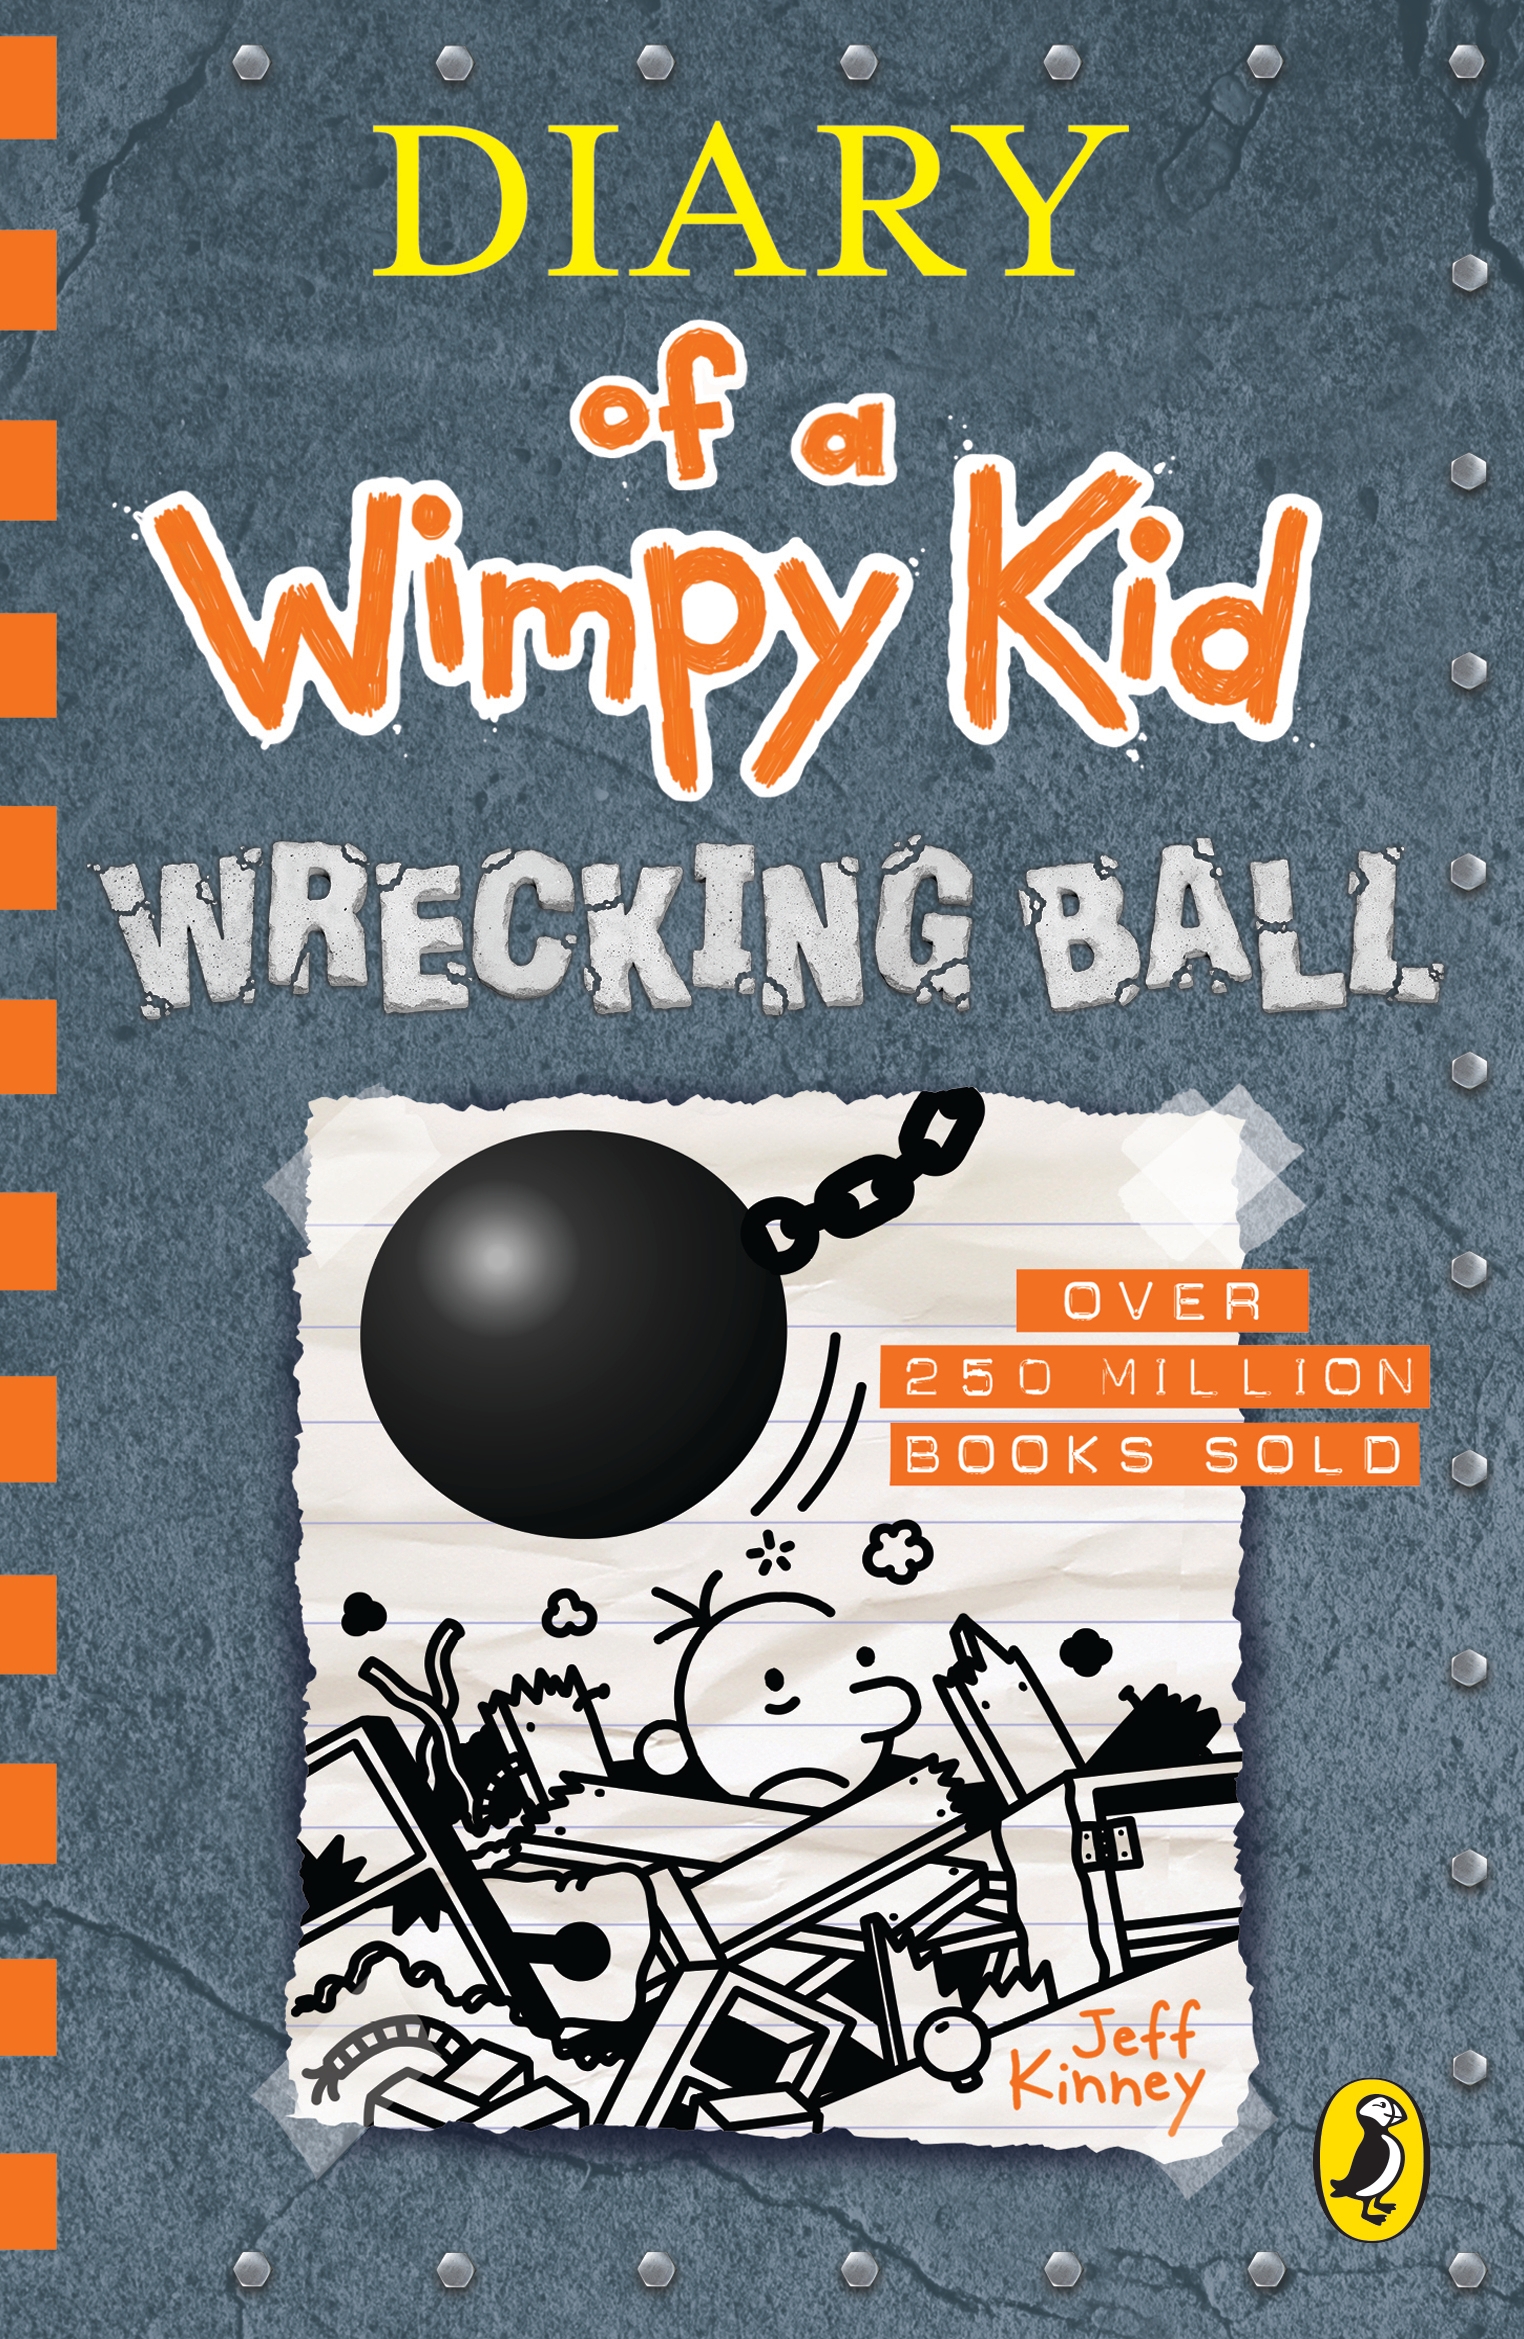 DIARY OF A WIMPY KID 14: WRECKING BALL